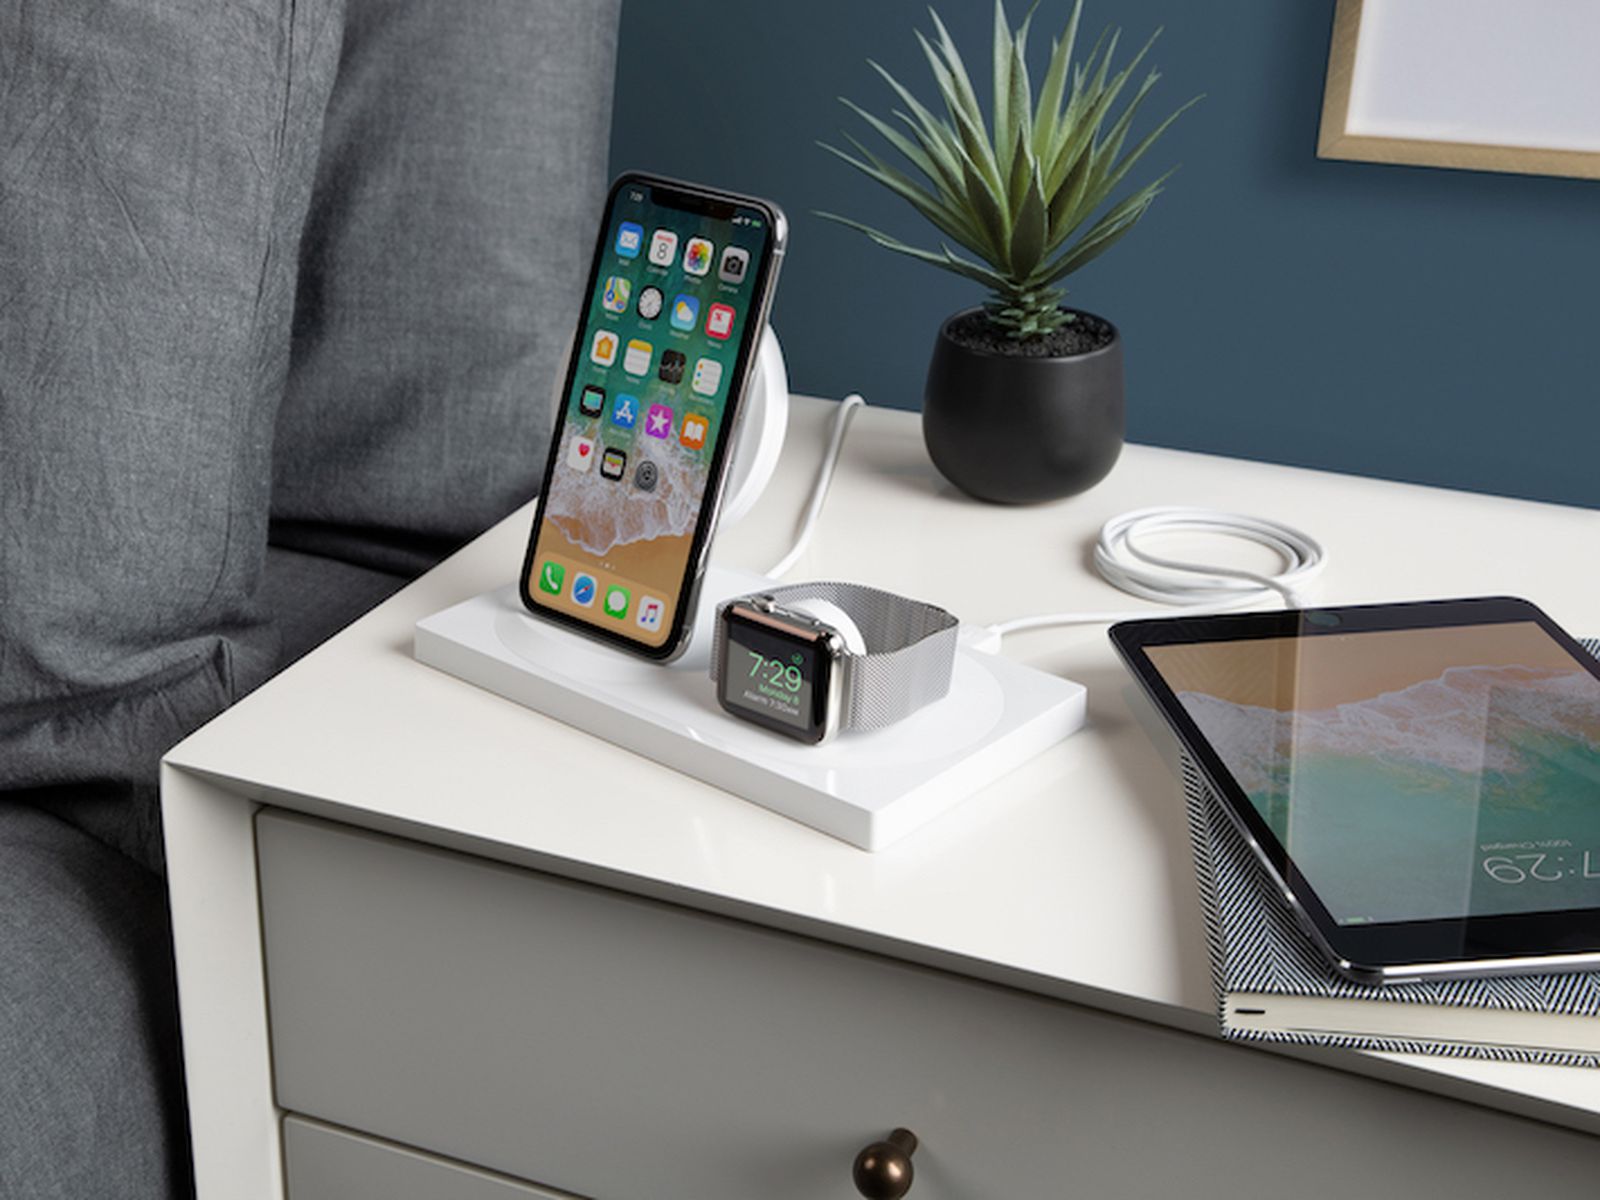 Belkin Introduces BOOSTUP Wireless Charging Dock With iPhone XS/XS Max/XR  and Apple Watch Series 4 Compatibility - MacRumors